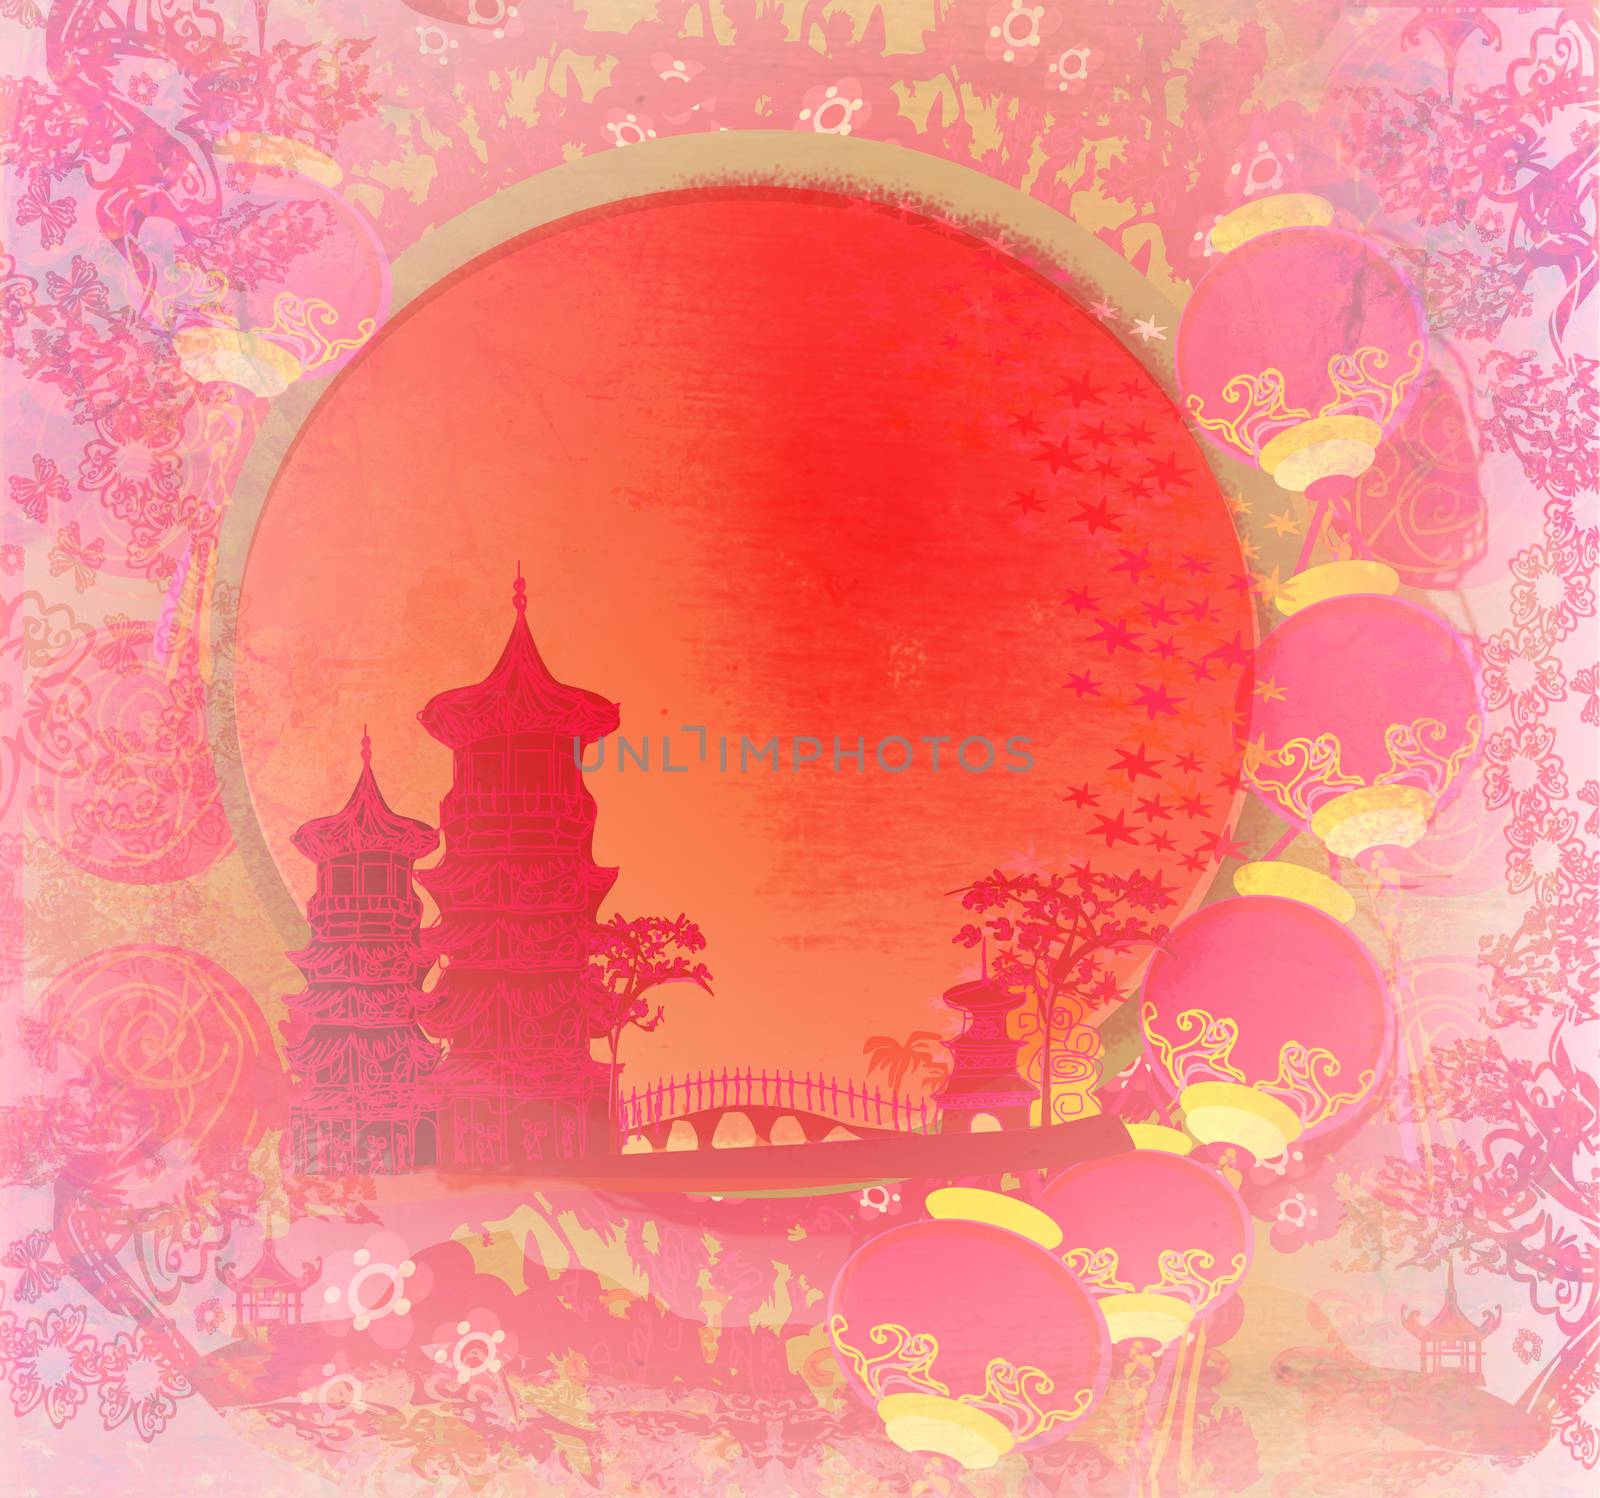 Chinese New Year card - Traditional lanterns and Asian buildings